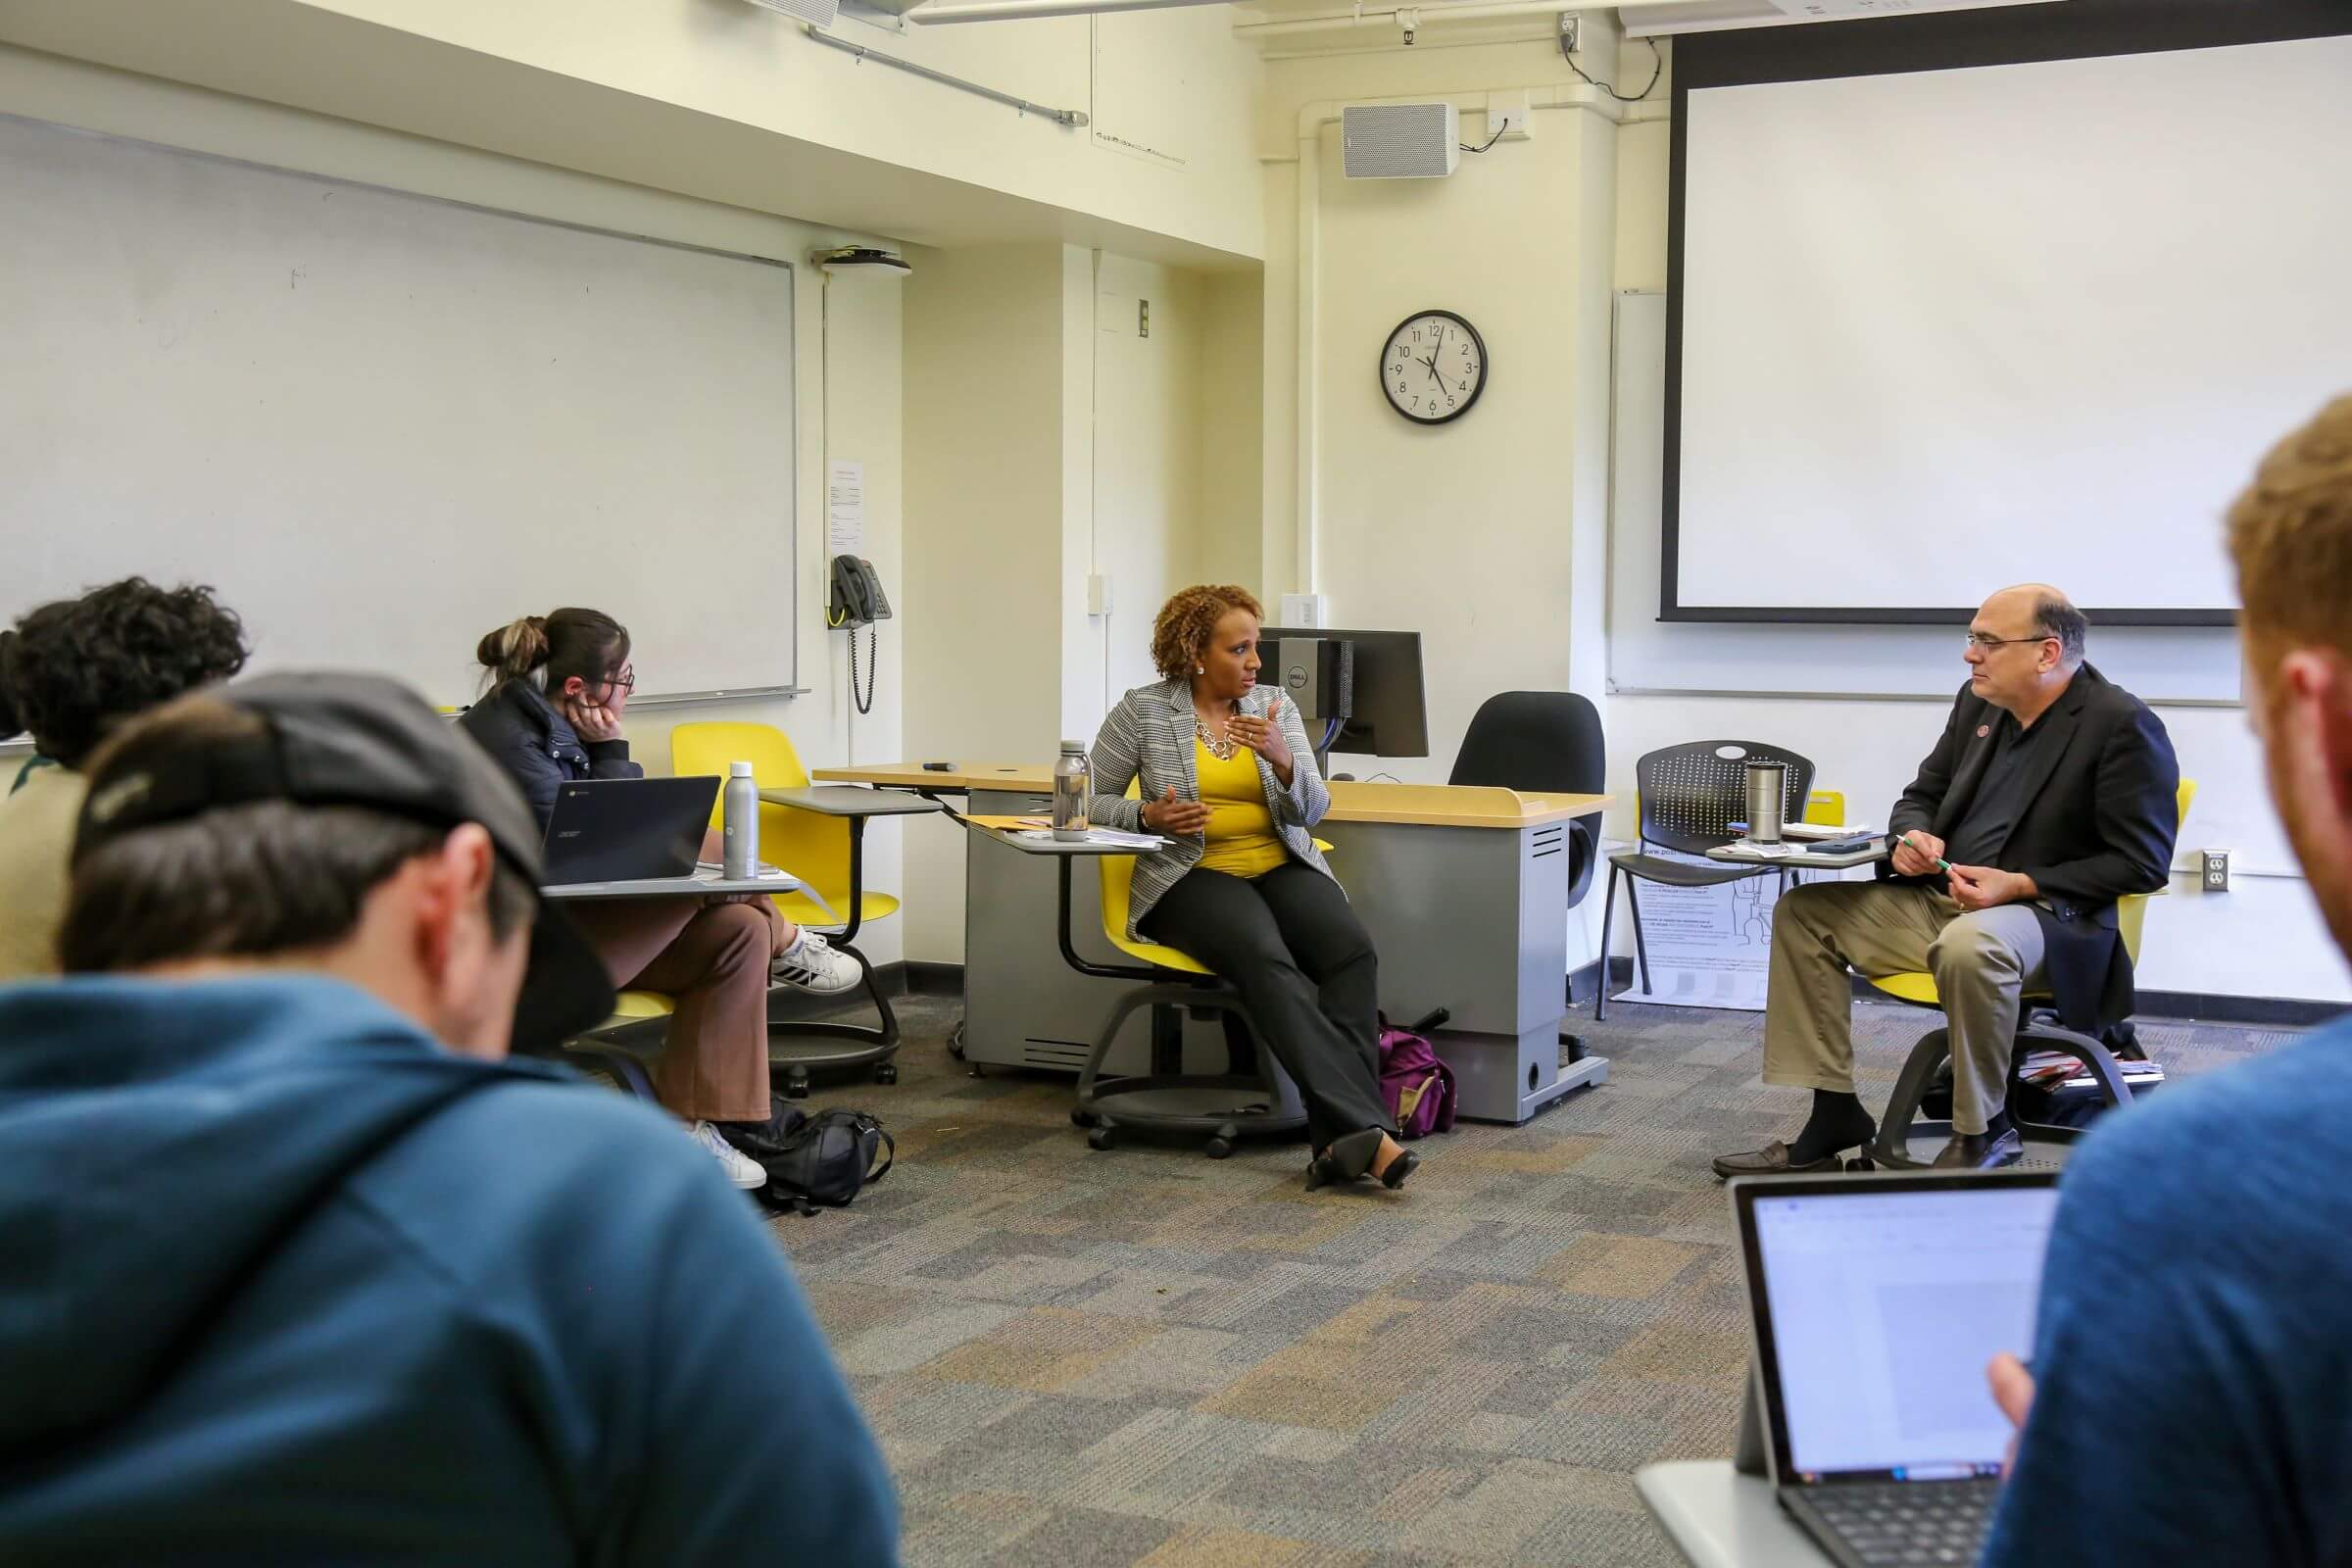 The Ventura County Registrar of Voters ​​​​Michelle Ascencion visits with CSUCI Professor Tim Allison and his class.